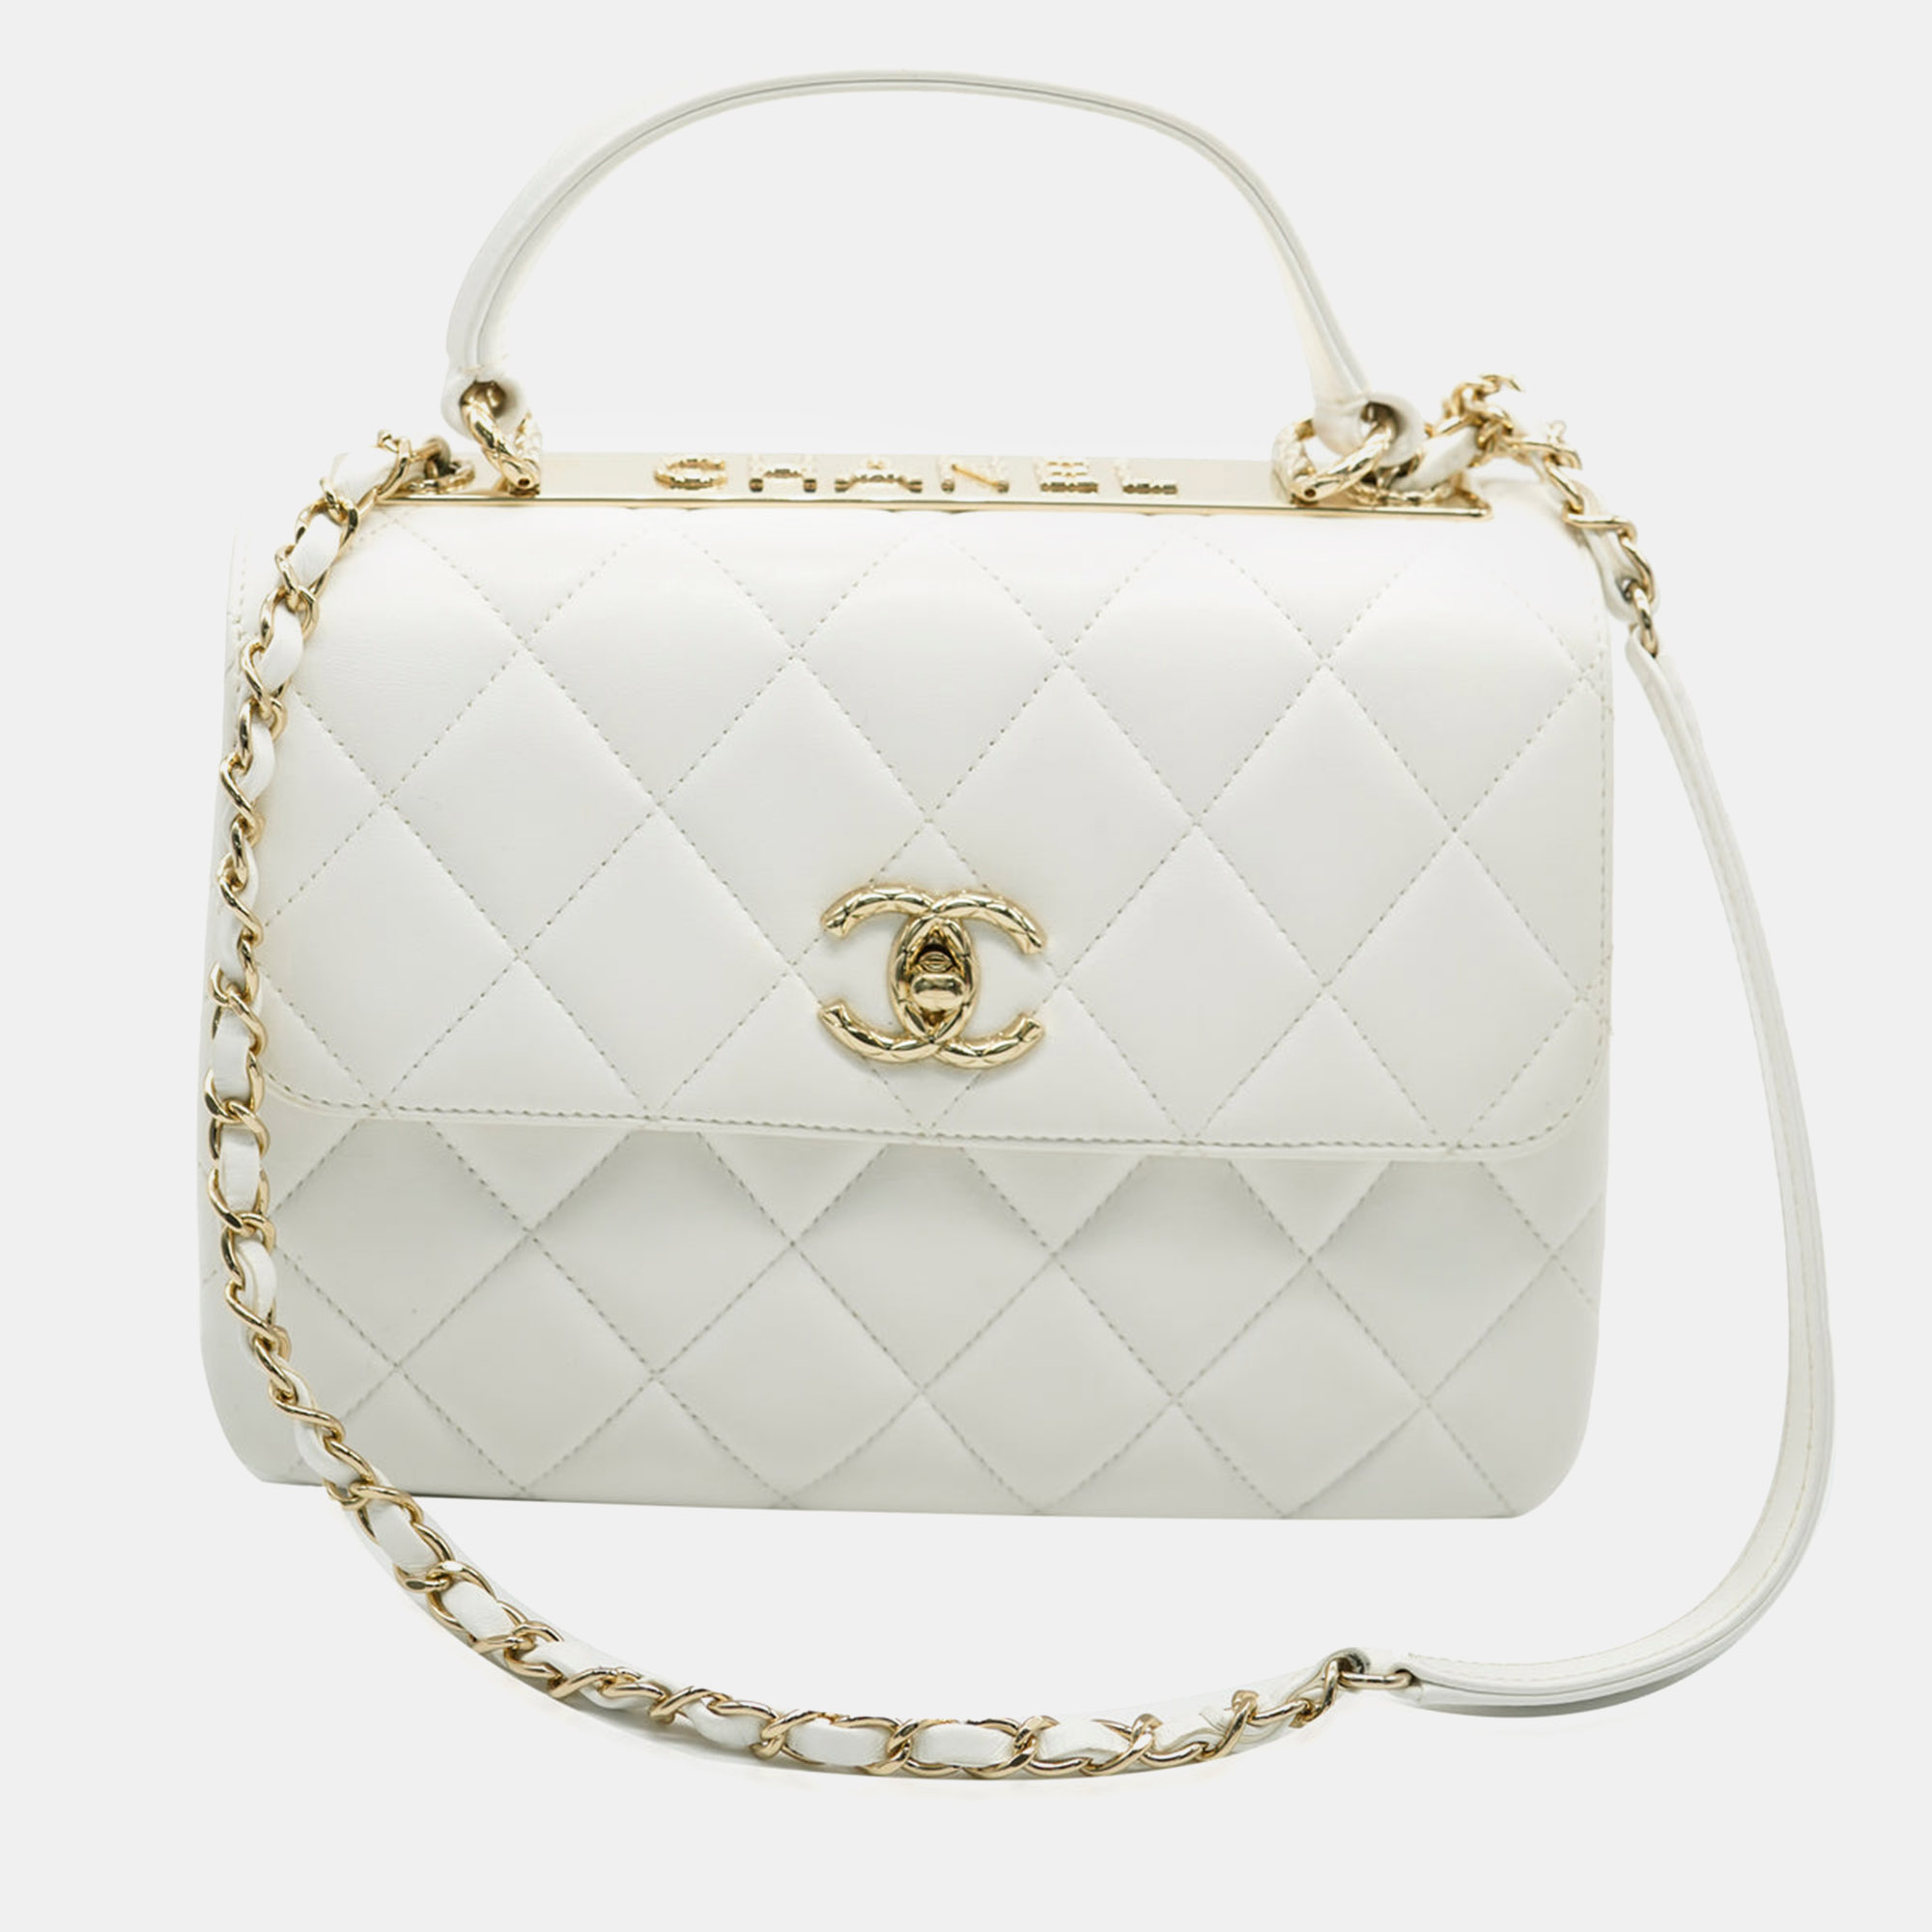 Chanel white quilted lambskin small cc trendy flap bag